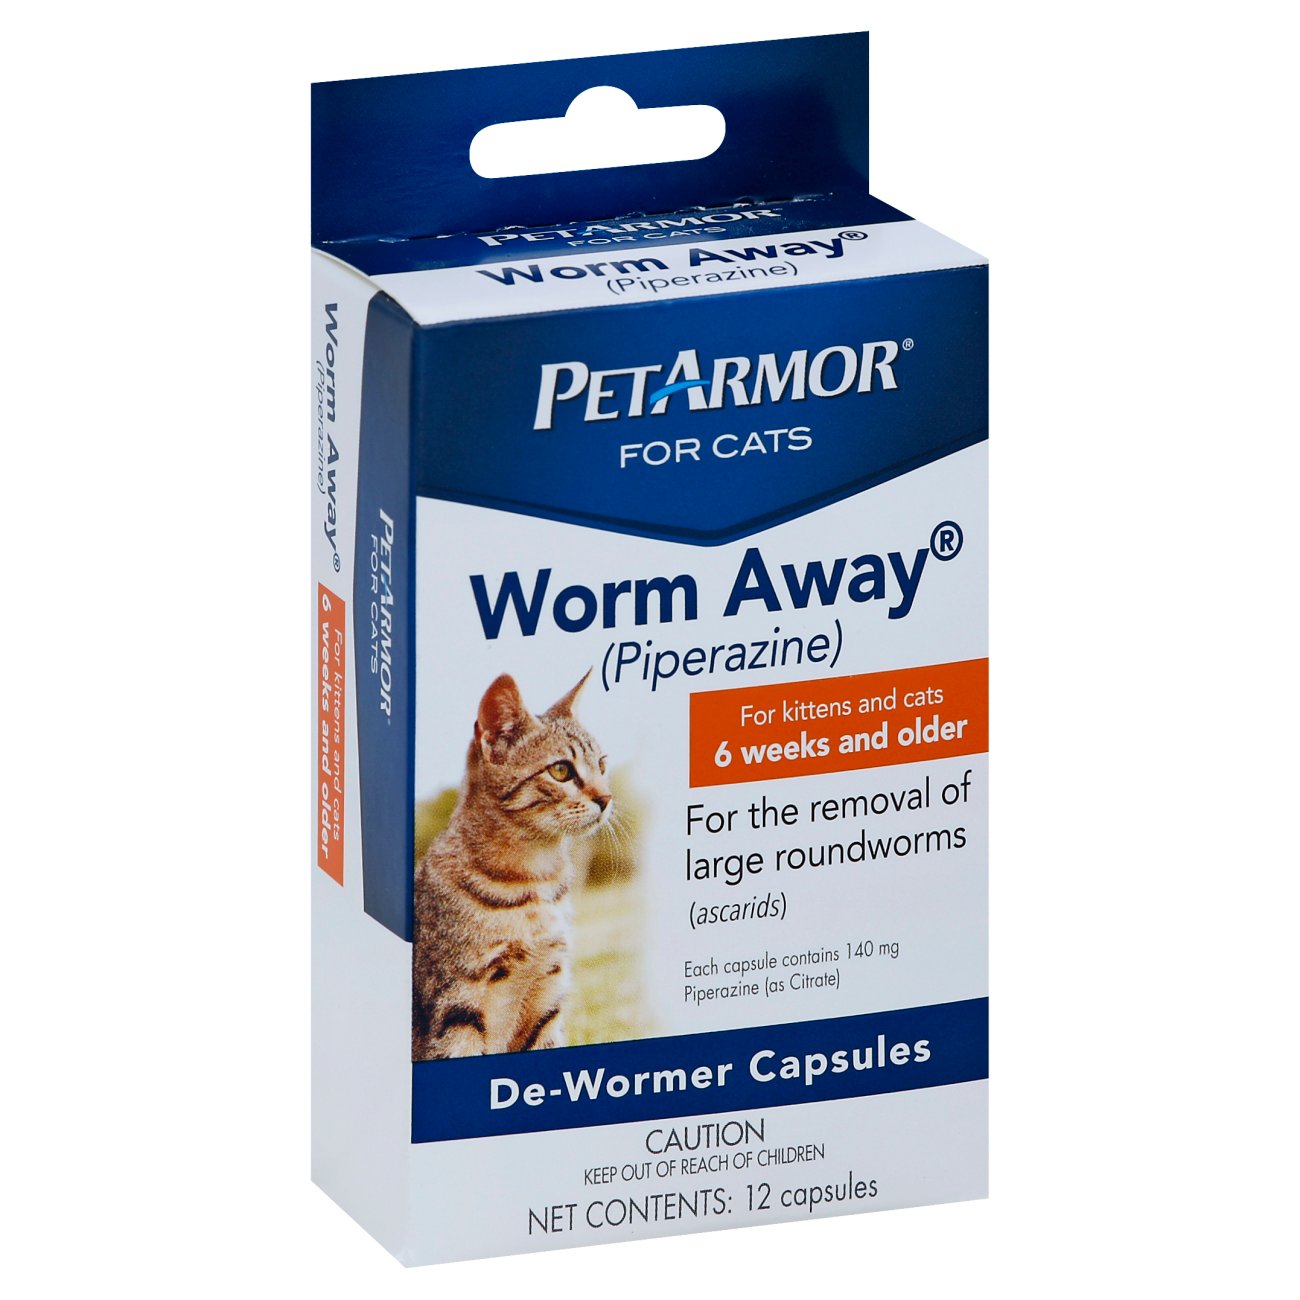 PetArmor Worm Away DeWormer Capsules for Cats Shop Cats at HEB